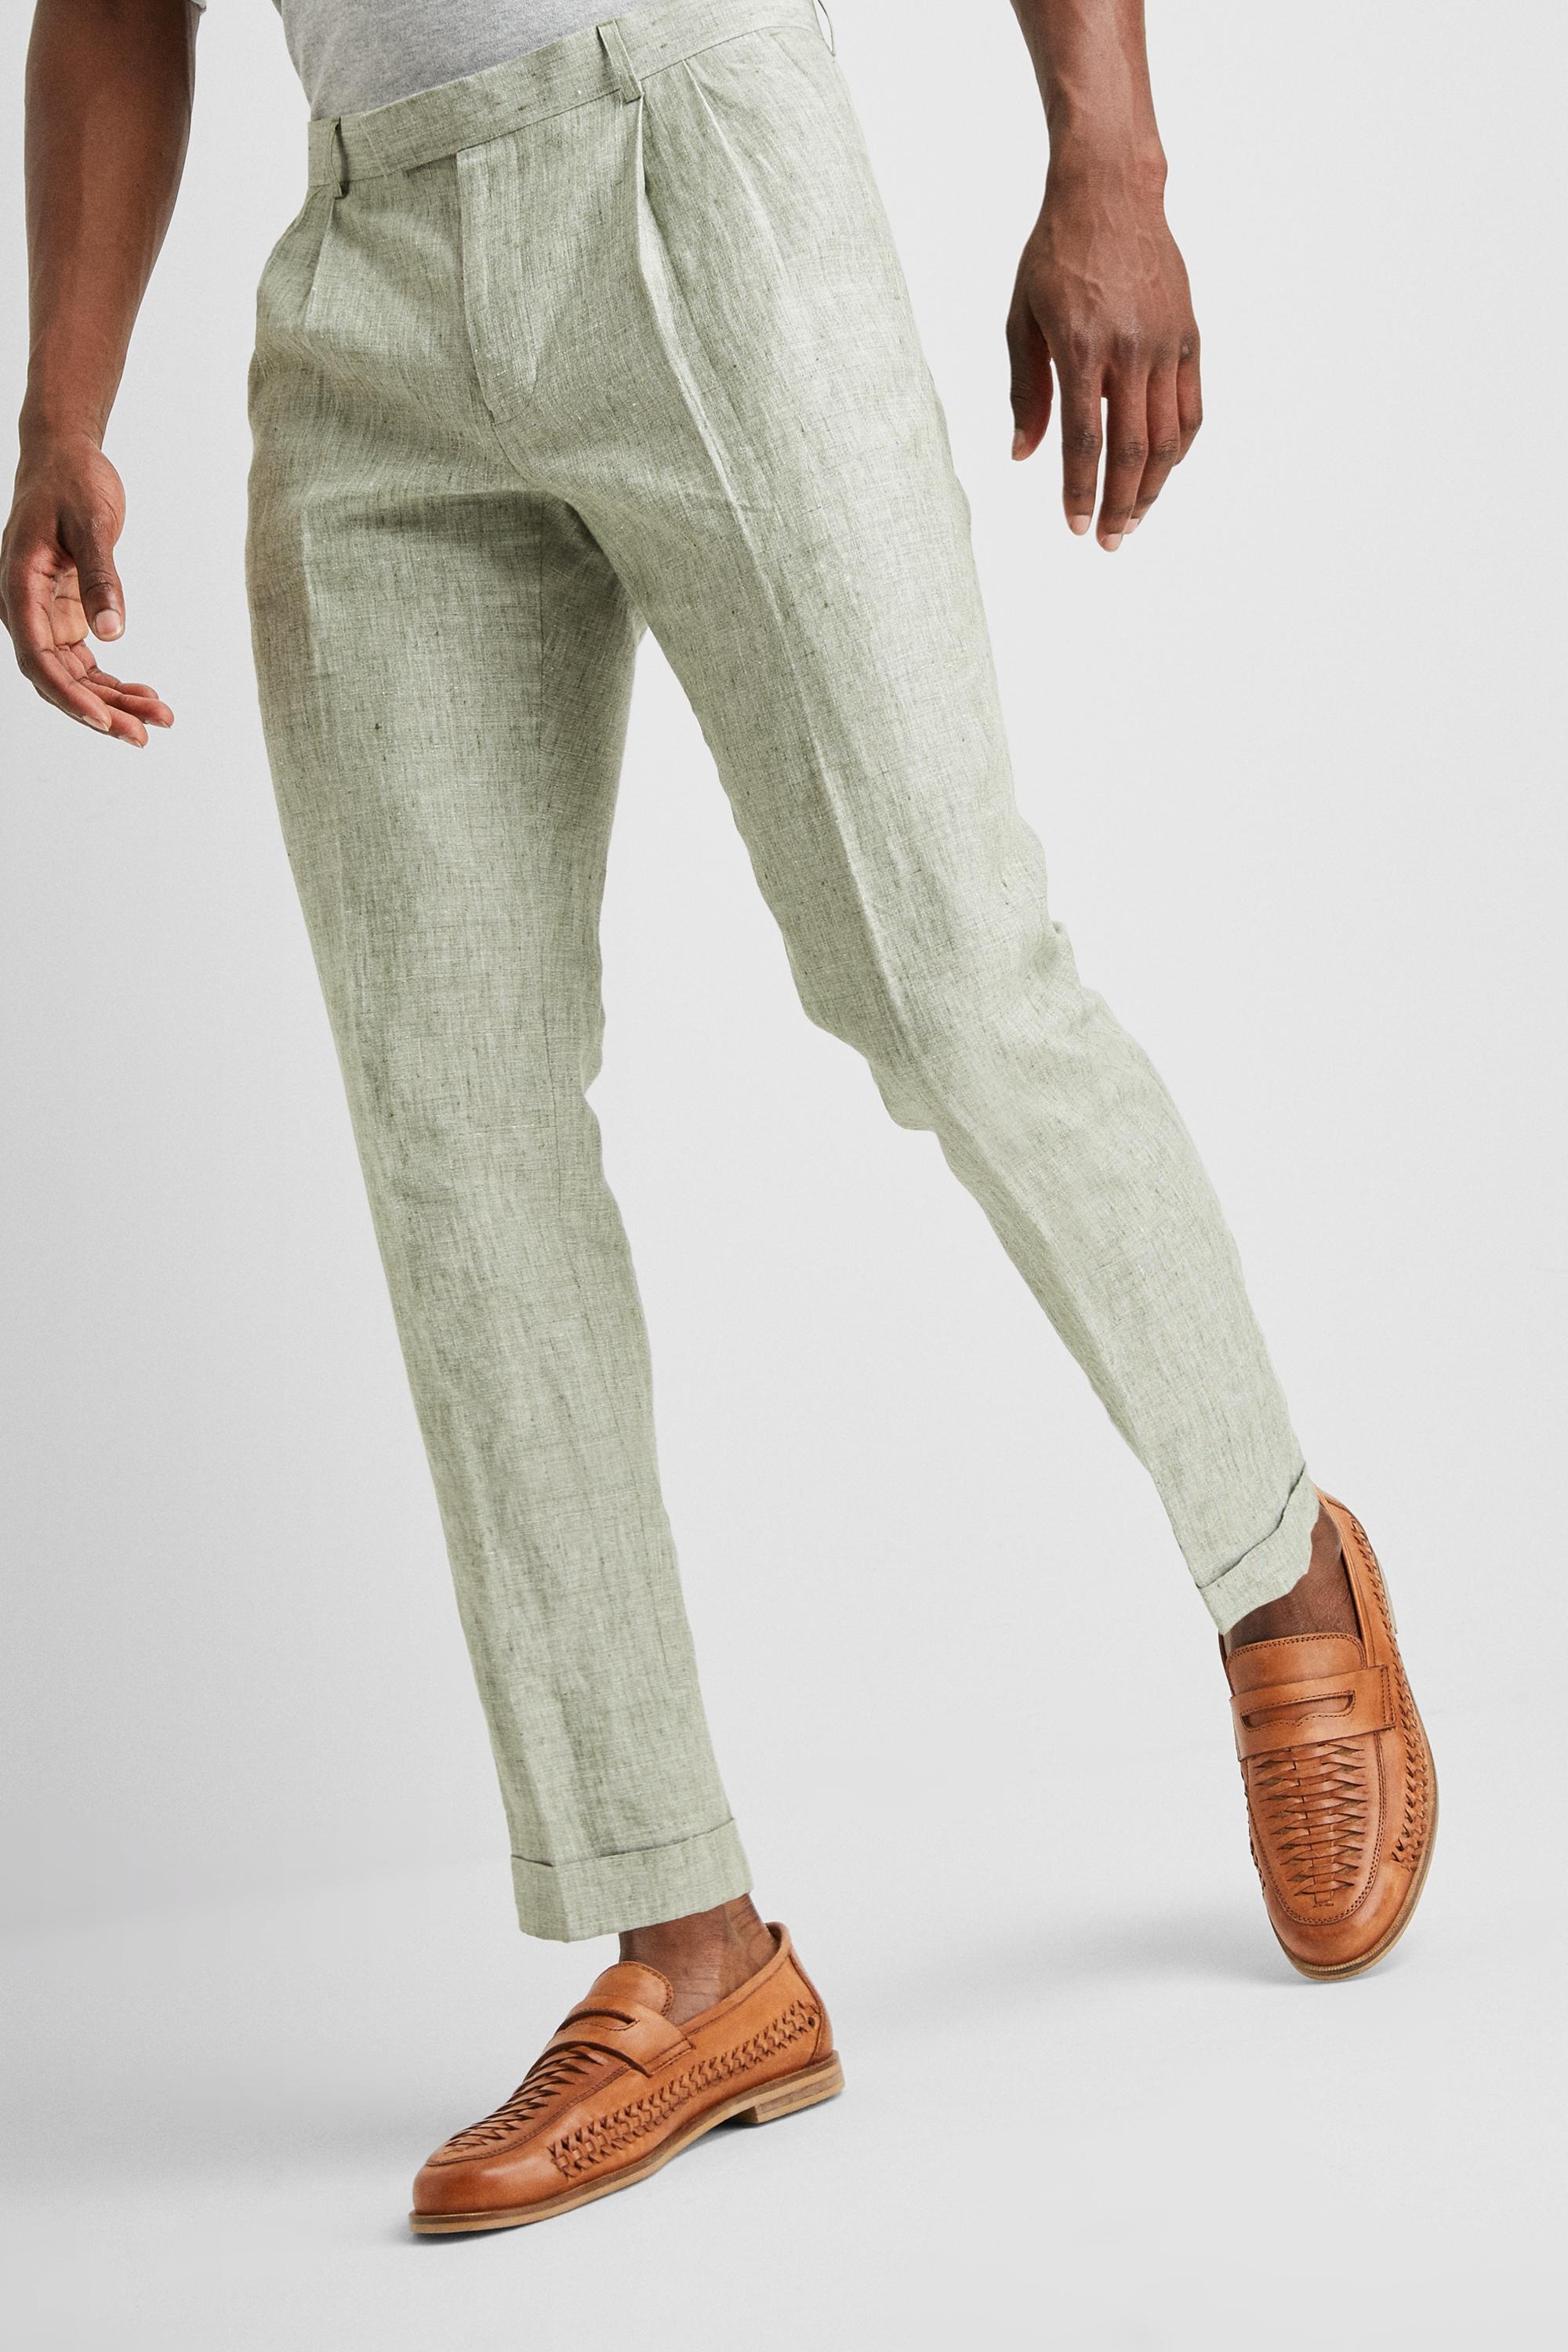 Massimo Dutti Slim Fit Linen Trousers in Pink  UFO No More